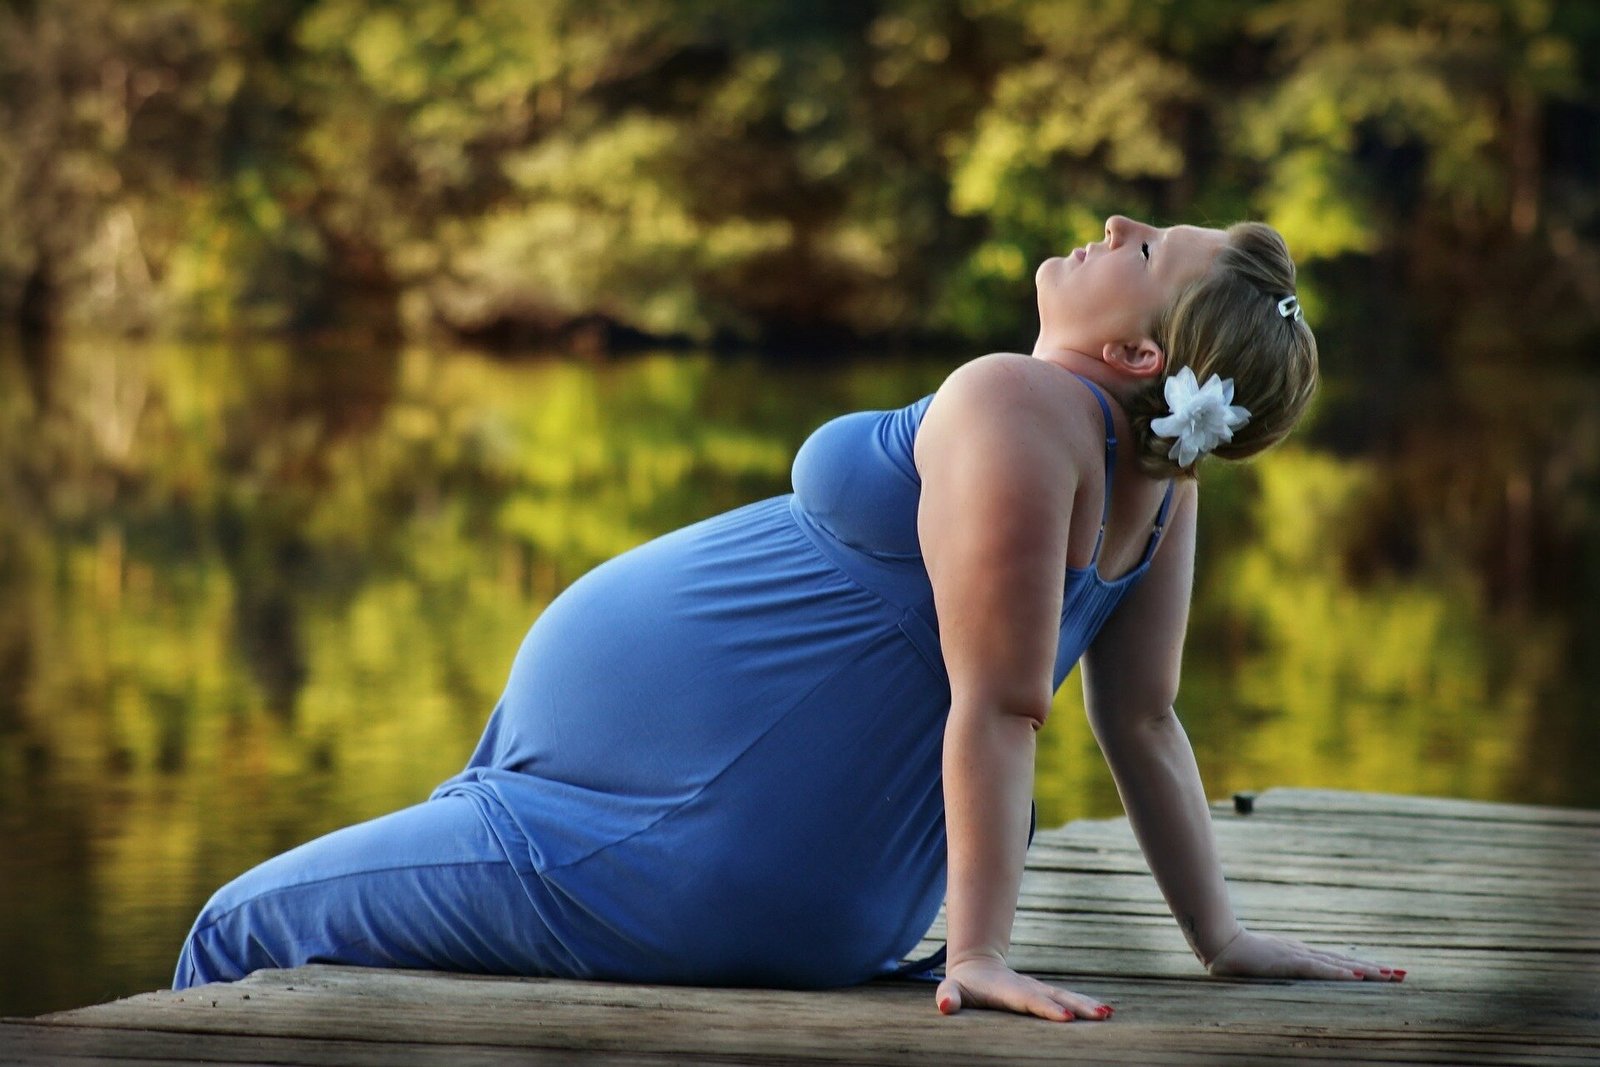 Study shows importance of coaching as part of lifestyle programs for women planning pregnancy